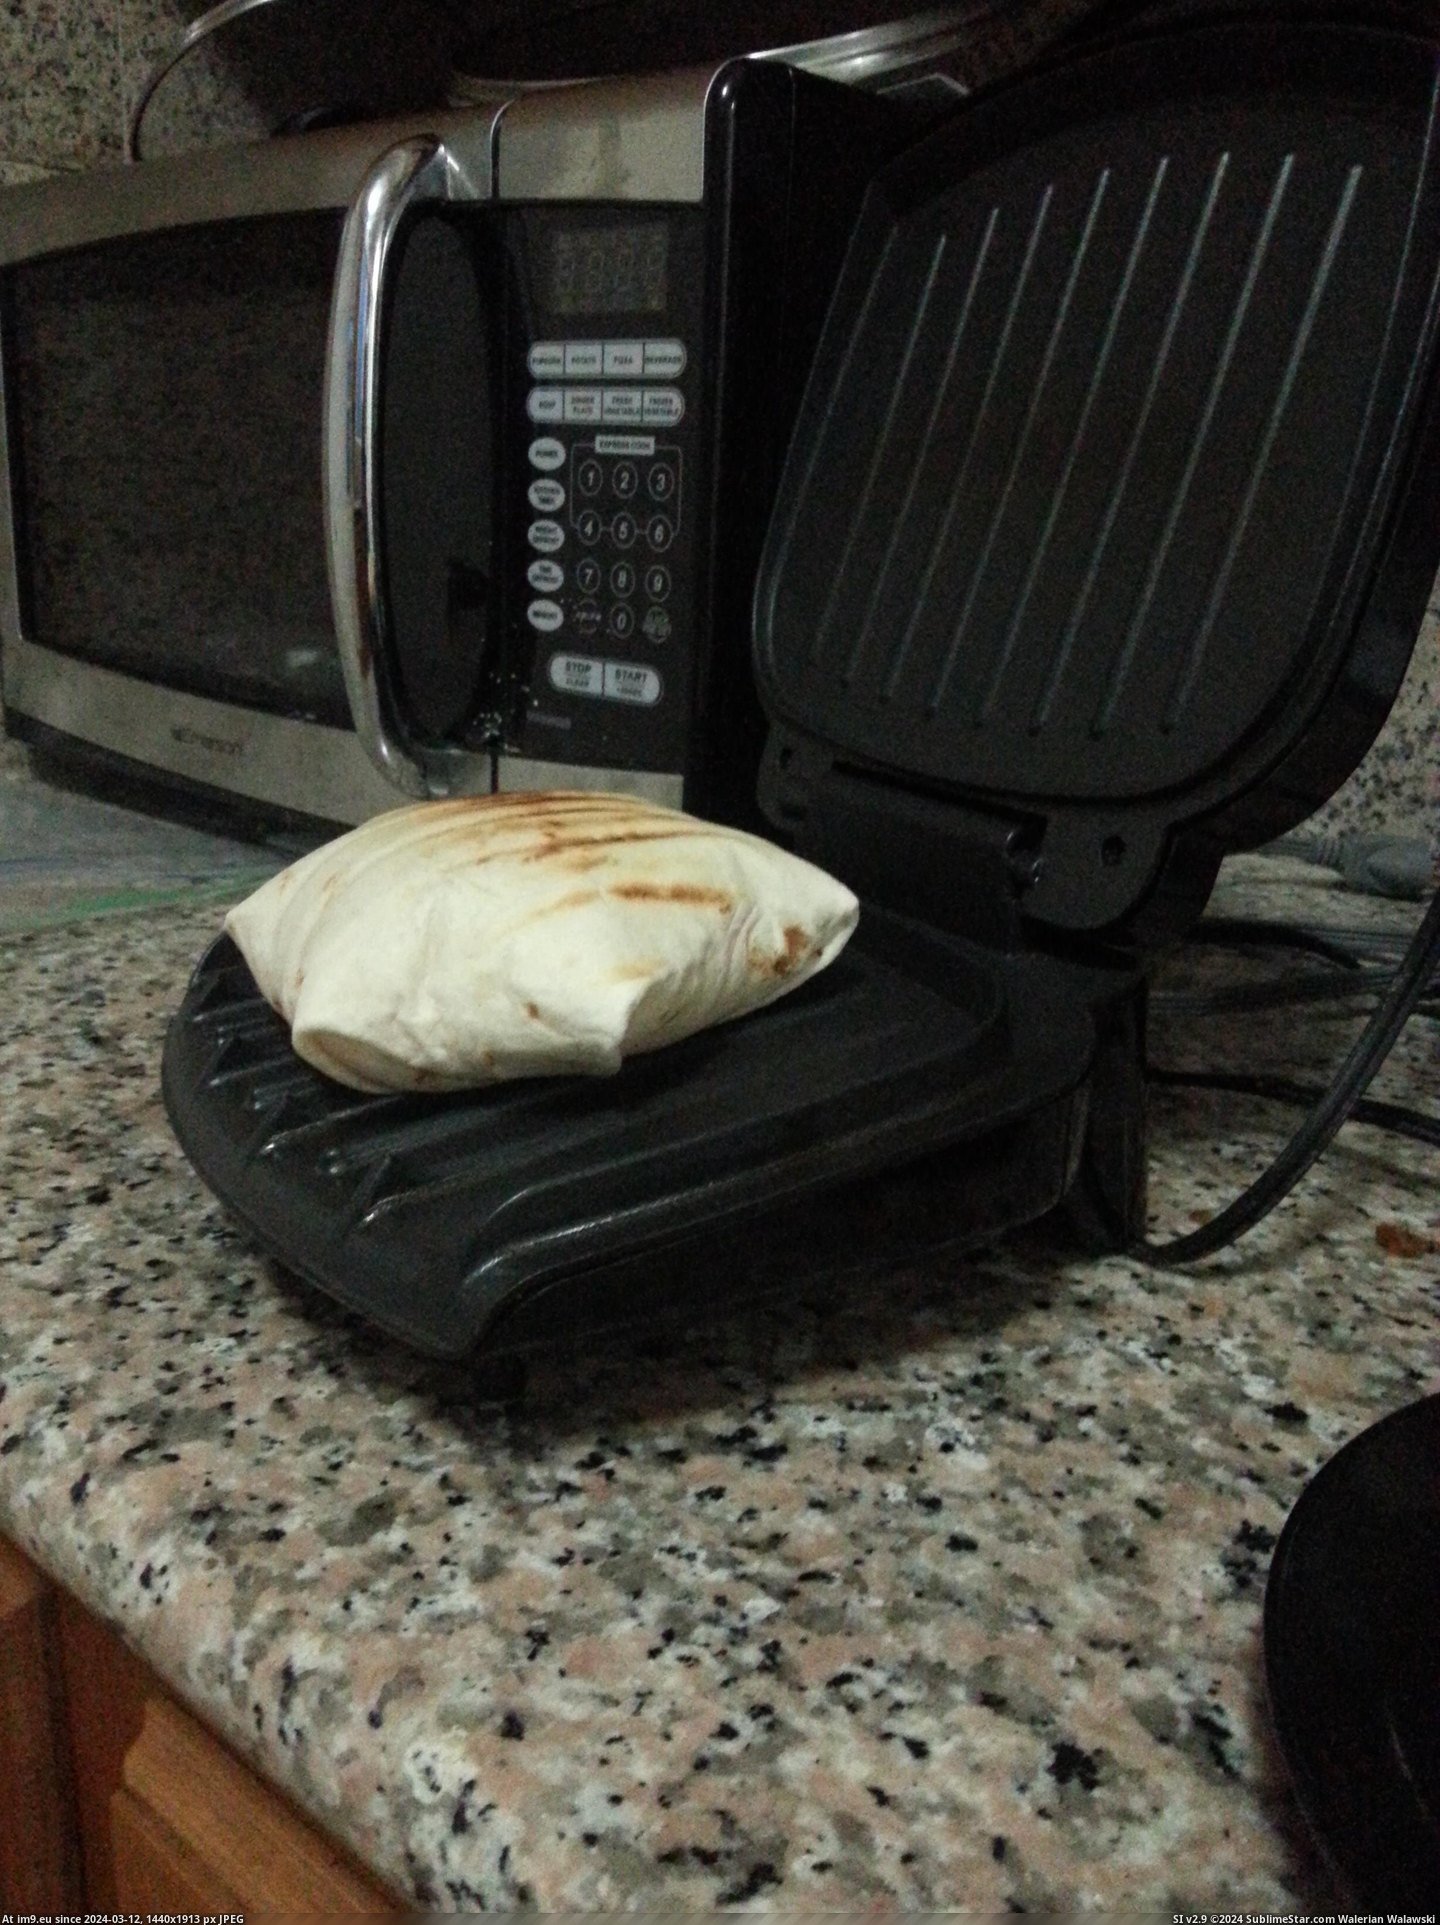 #Too #Air #Any #Inflated #Crac #Expanding #Quesadilla #Perfectly #Cheese #Folded [Mildlyinteresting] I made a quesadilla and folded it too perfectly. It inflated from air expanding and the cheese kept any crac Pic. (Image of album My r/MILDLYINTERESTING favs))